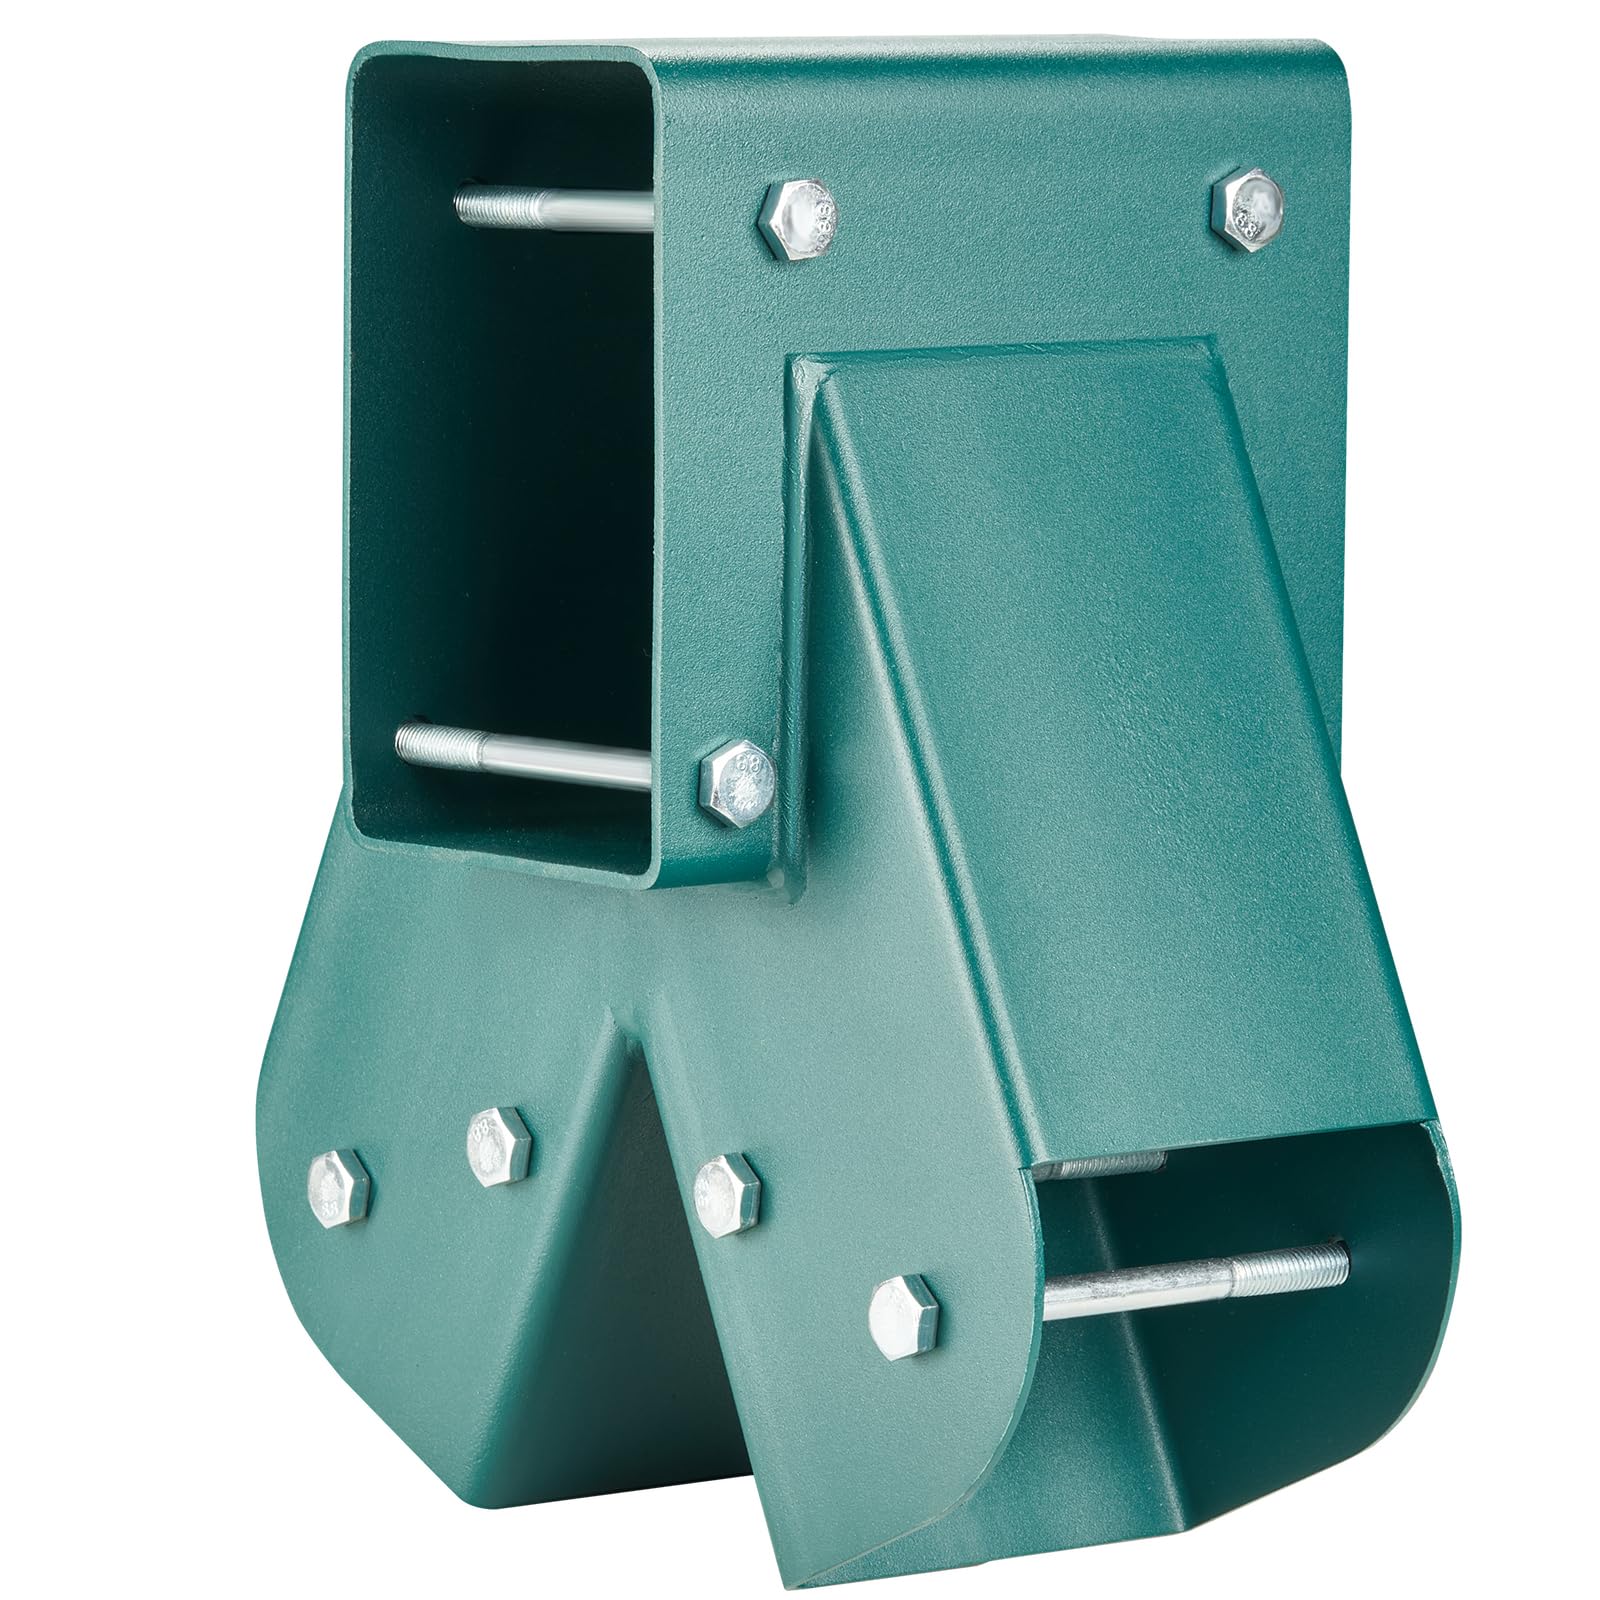 VEVOR A-Frame Middle Swing Brackets, Heavy Duty Carbon Steel Swing Set Hardware with Mounting Hardware, DIY Swing Set Bracket Swing Set Kit for 2 (4x4) Legs & 1 (4x6) Beam, Green